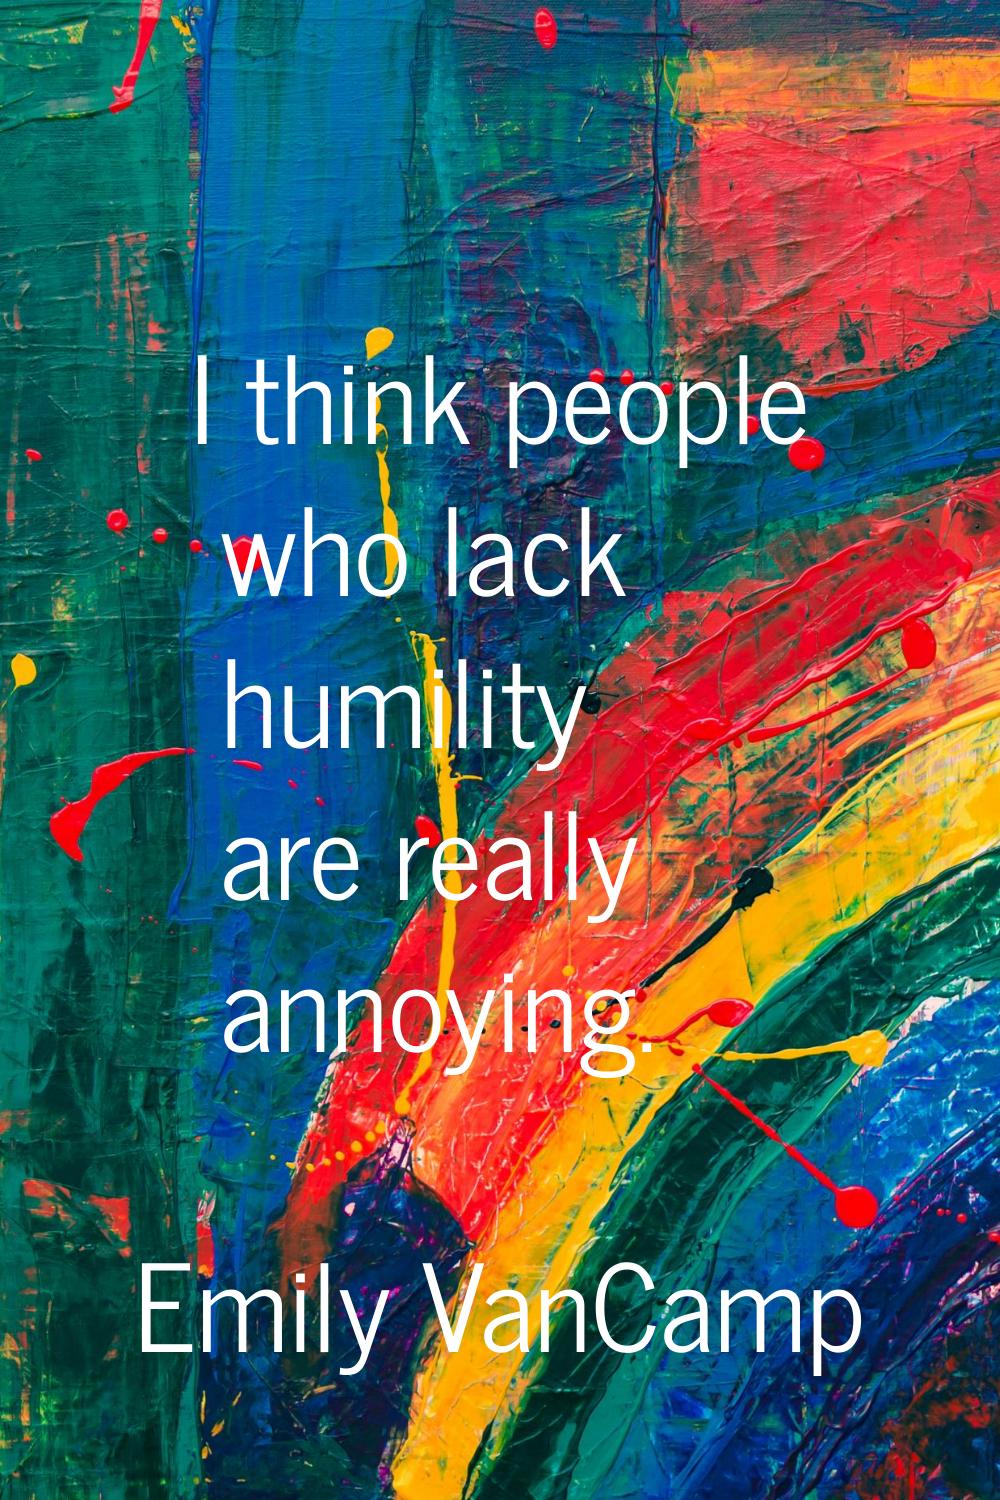 I think people who lack humility are really annoying.